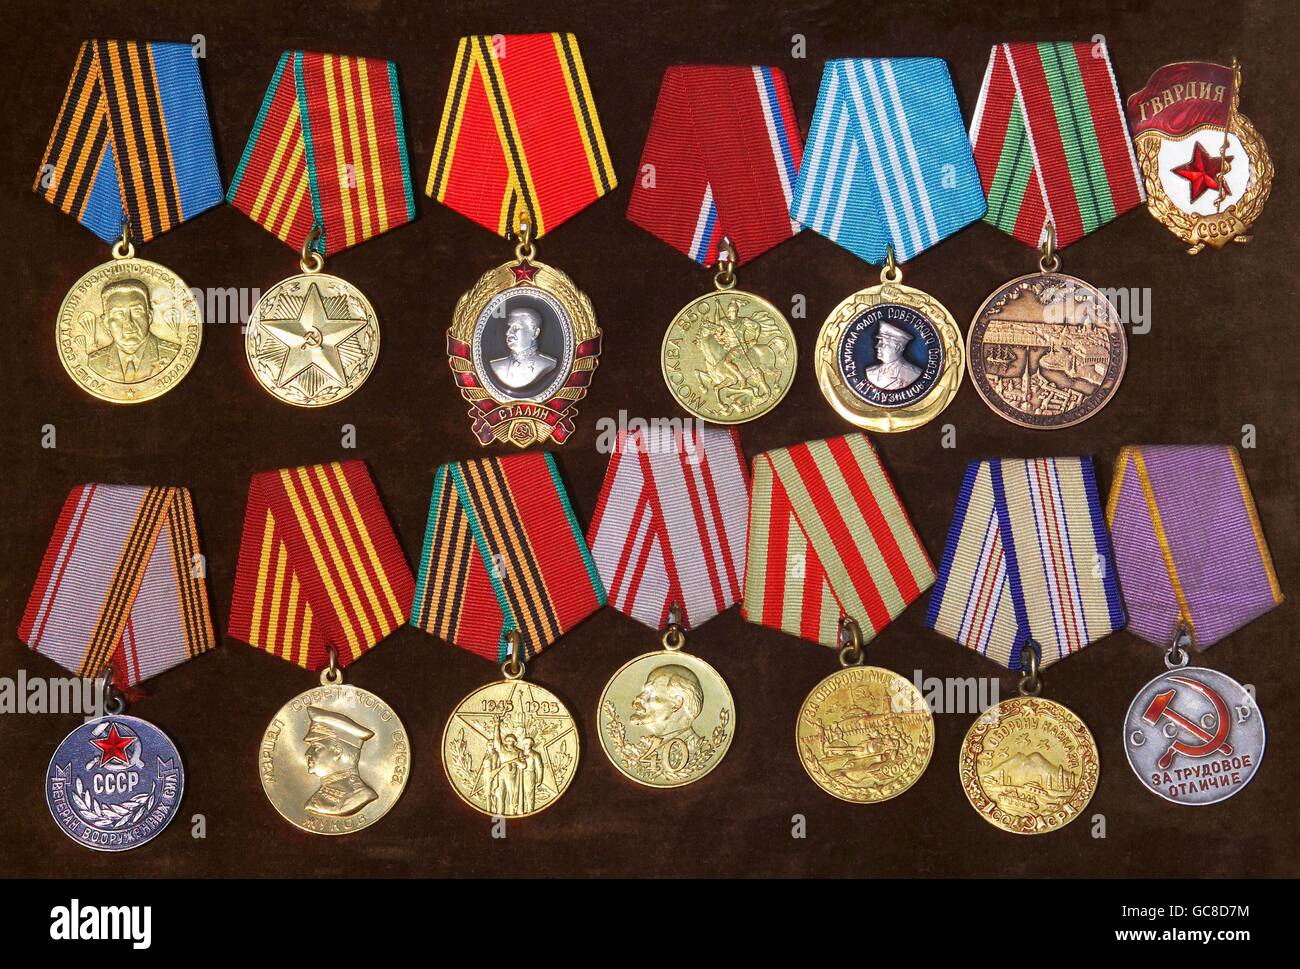 Awards Medals Badges of White Armies & Governments 1917-1922 Russian Civil War